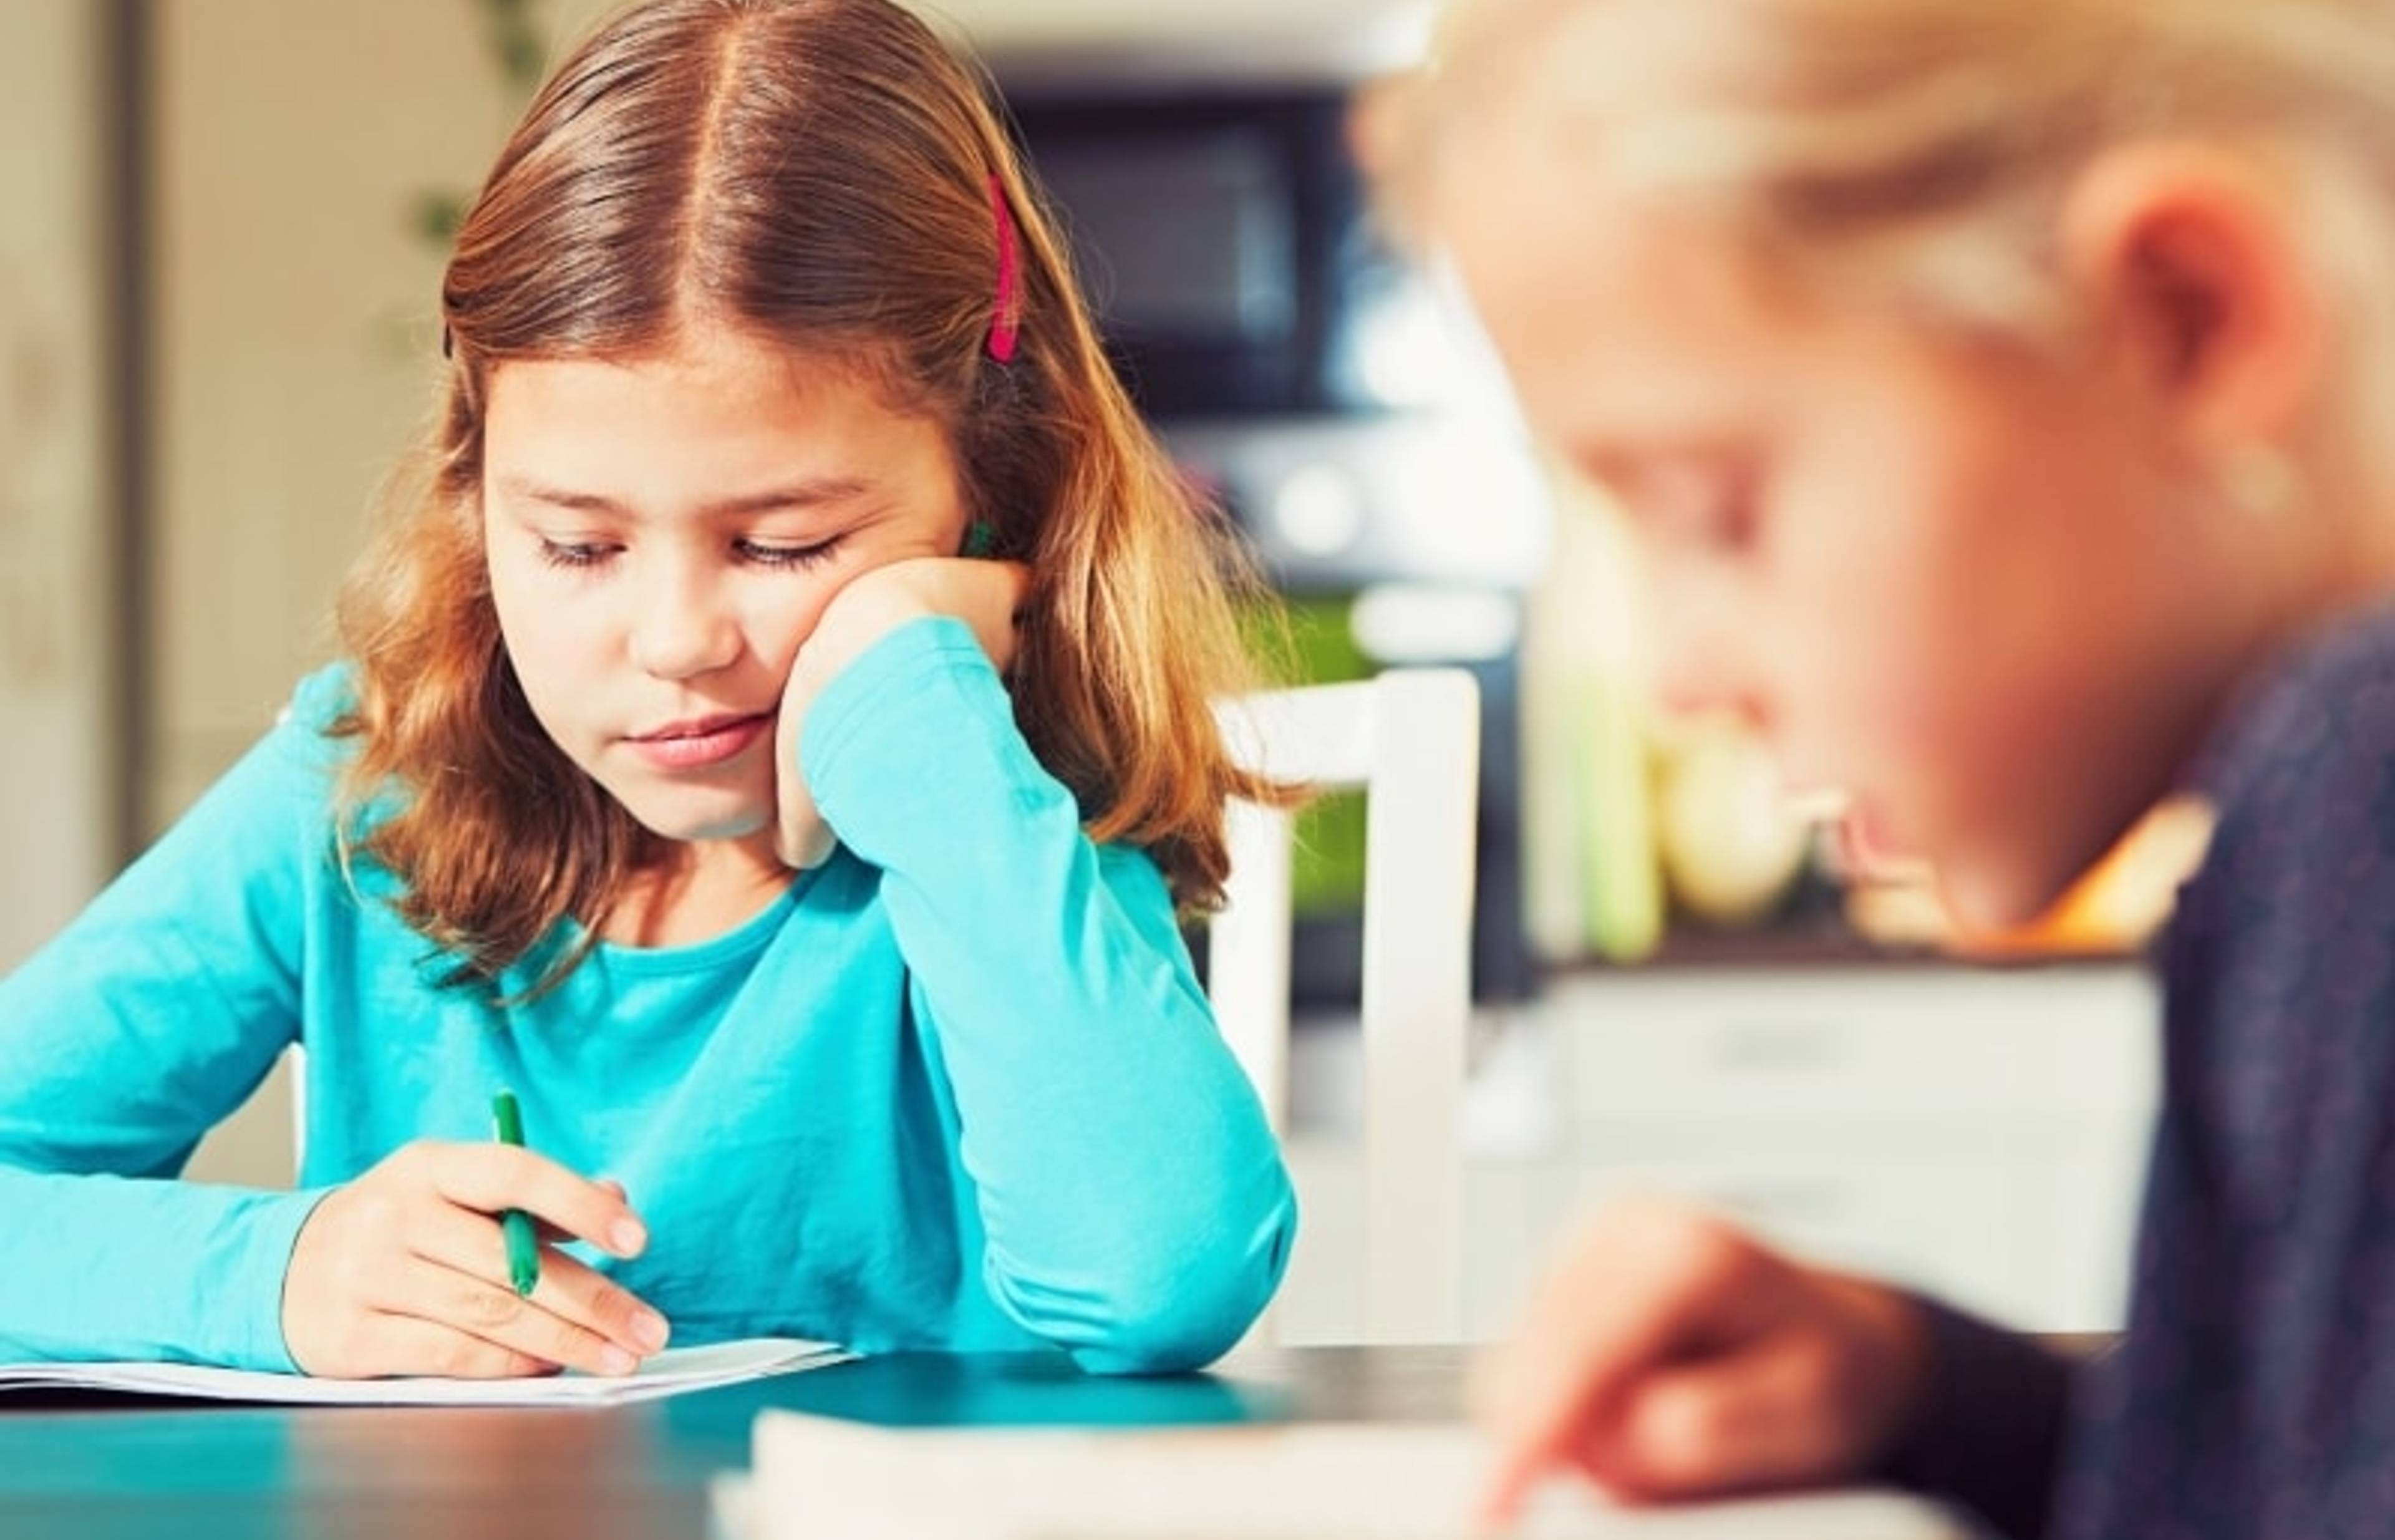 45 Positive Phrases to Say to Your Child at Homework Time